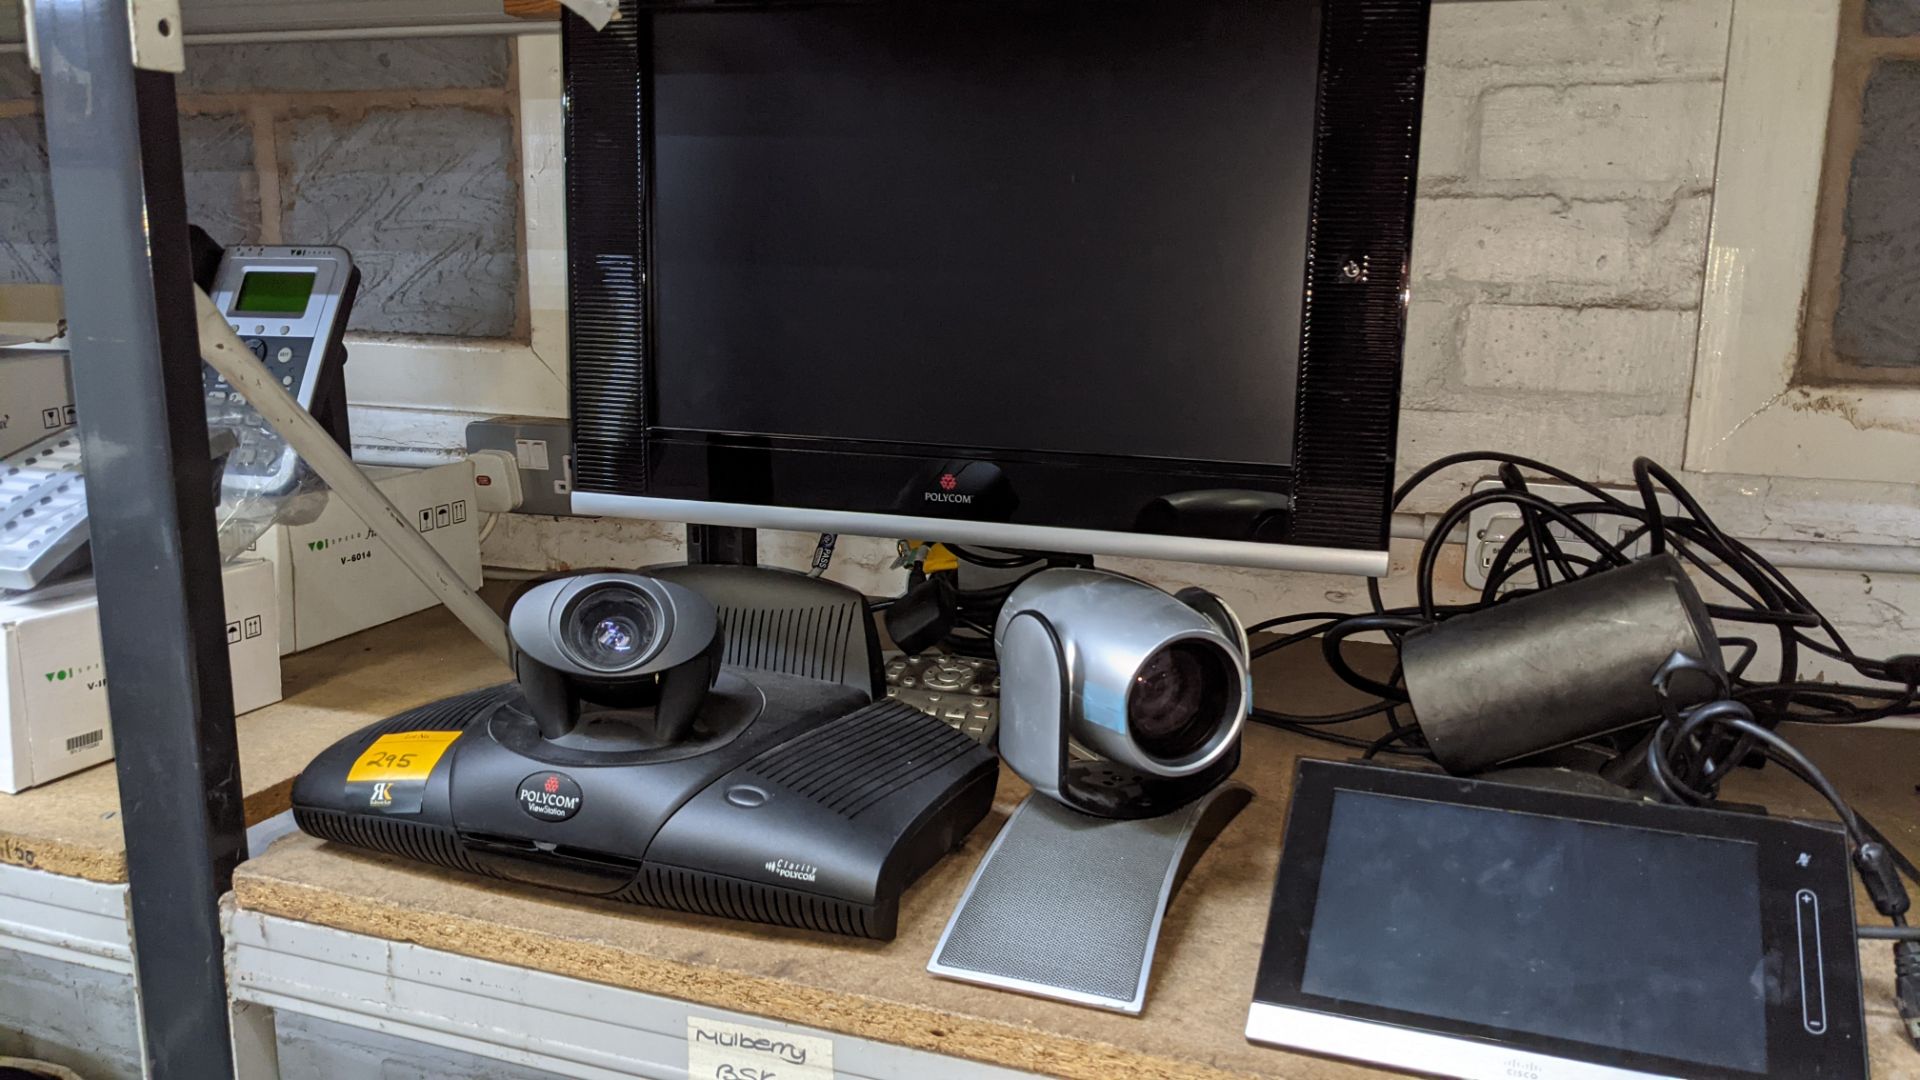 Contents of a bay of video conferencing equipment - Image 5 of 17